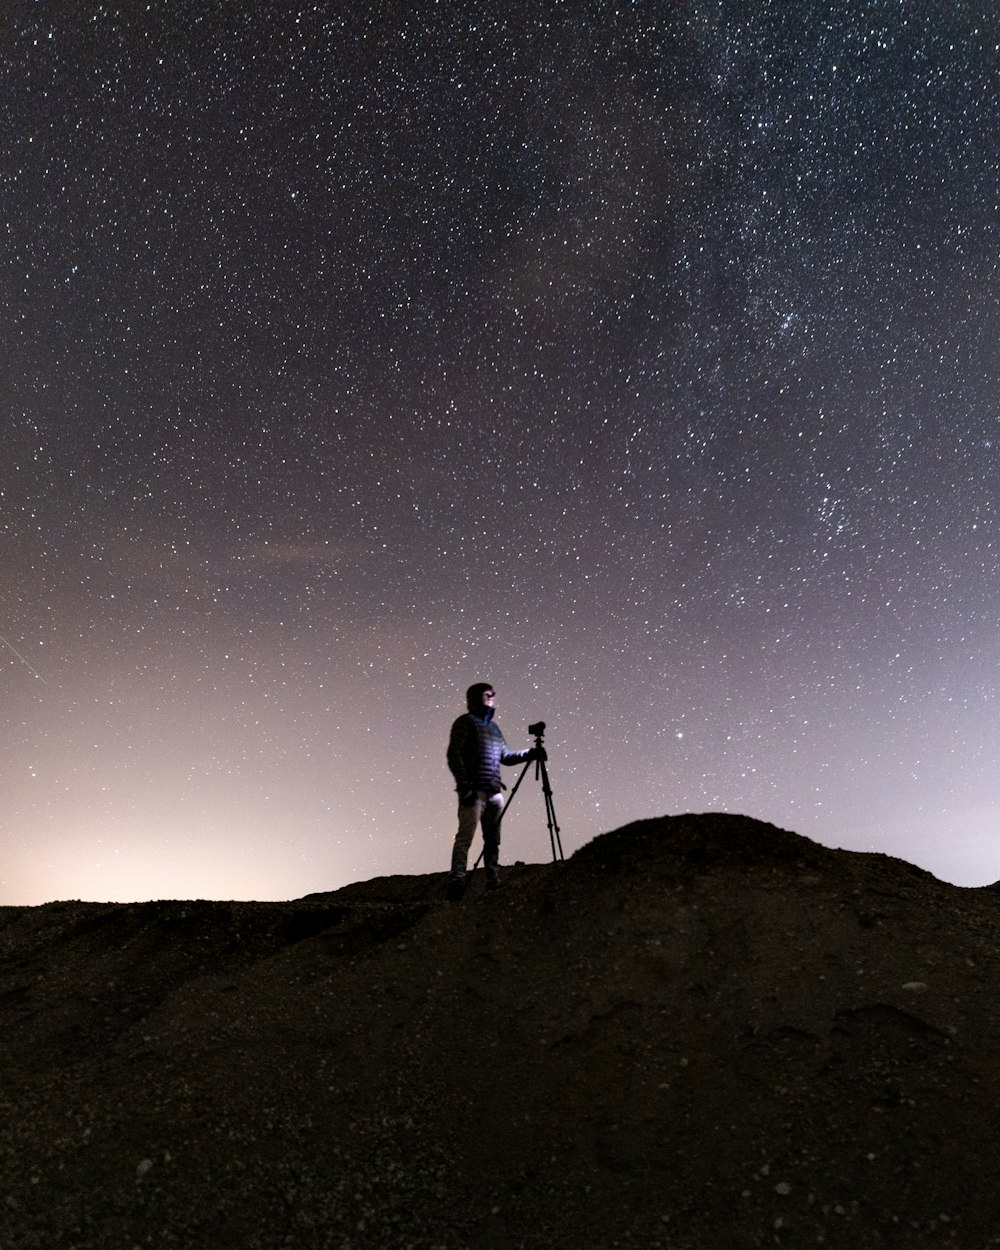 silhouette of man and woman standing on hill under starry night